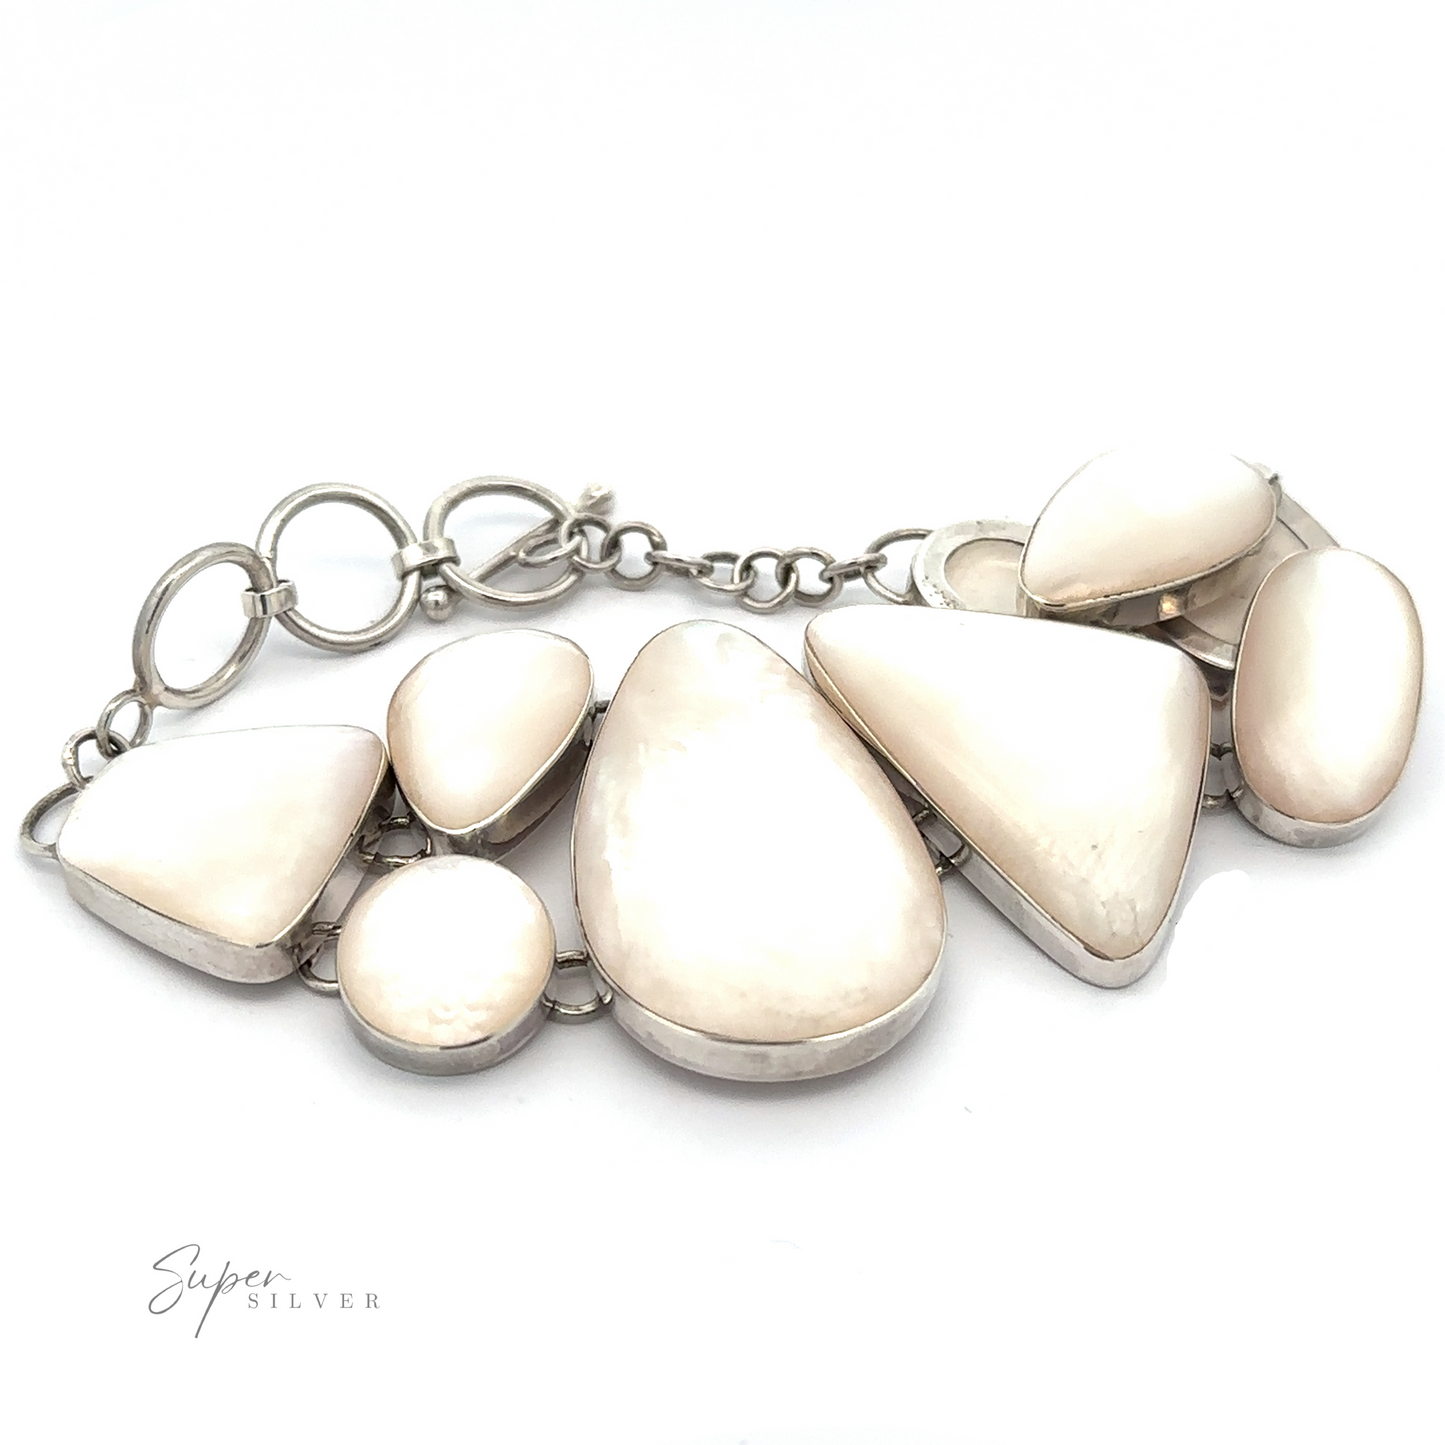 
                  
                    A Statement Mother of Pearl Bracelet in sterling silver features multiple large, polished mother-of-pearl stones in various geometric shapes, connected by a chain with circular links. The bracelet is displayed against a plain white background.
                  
                